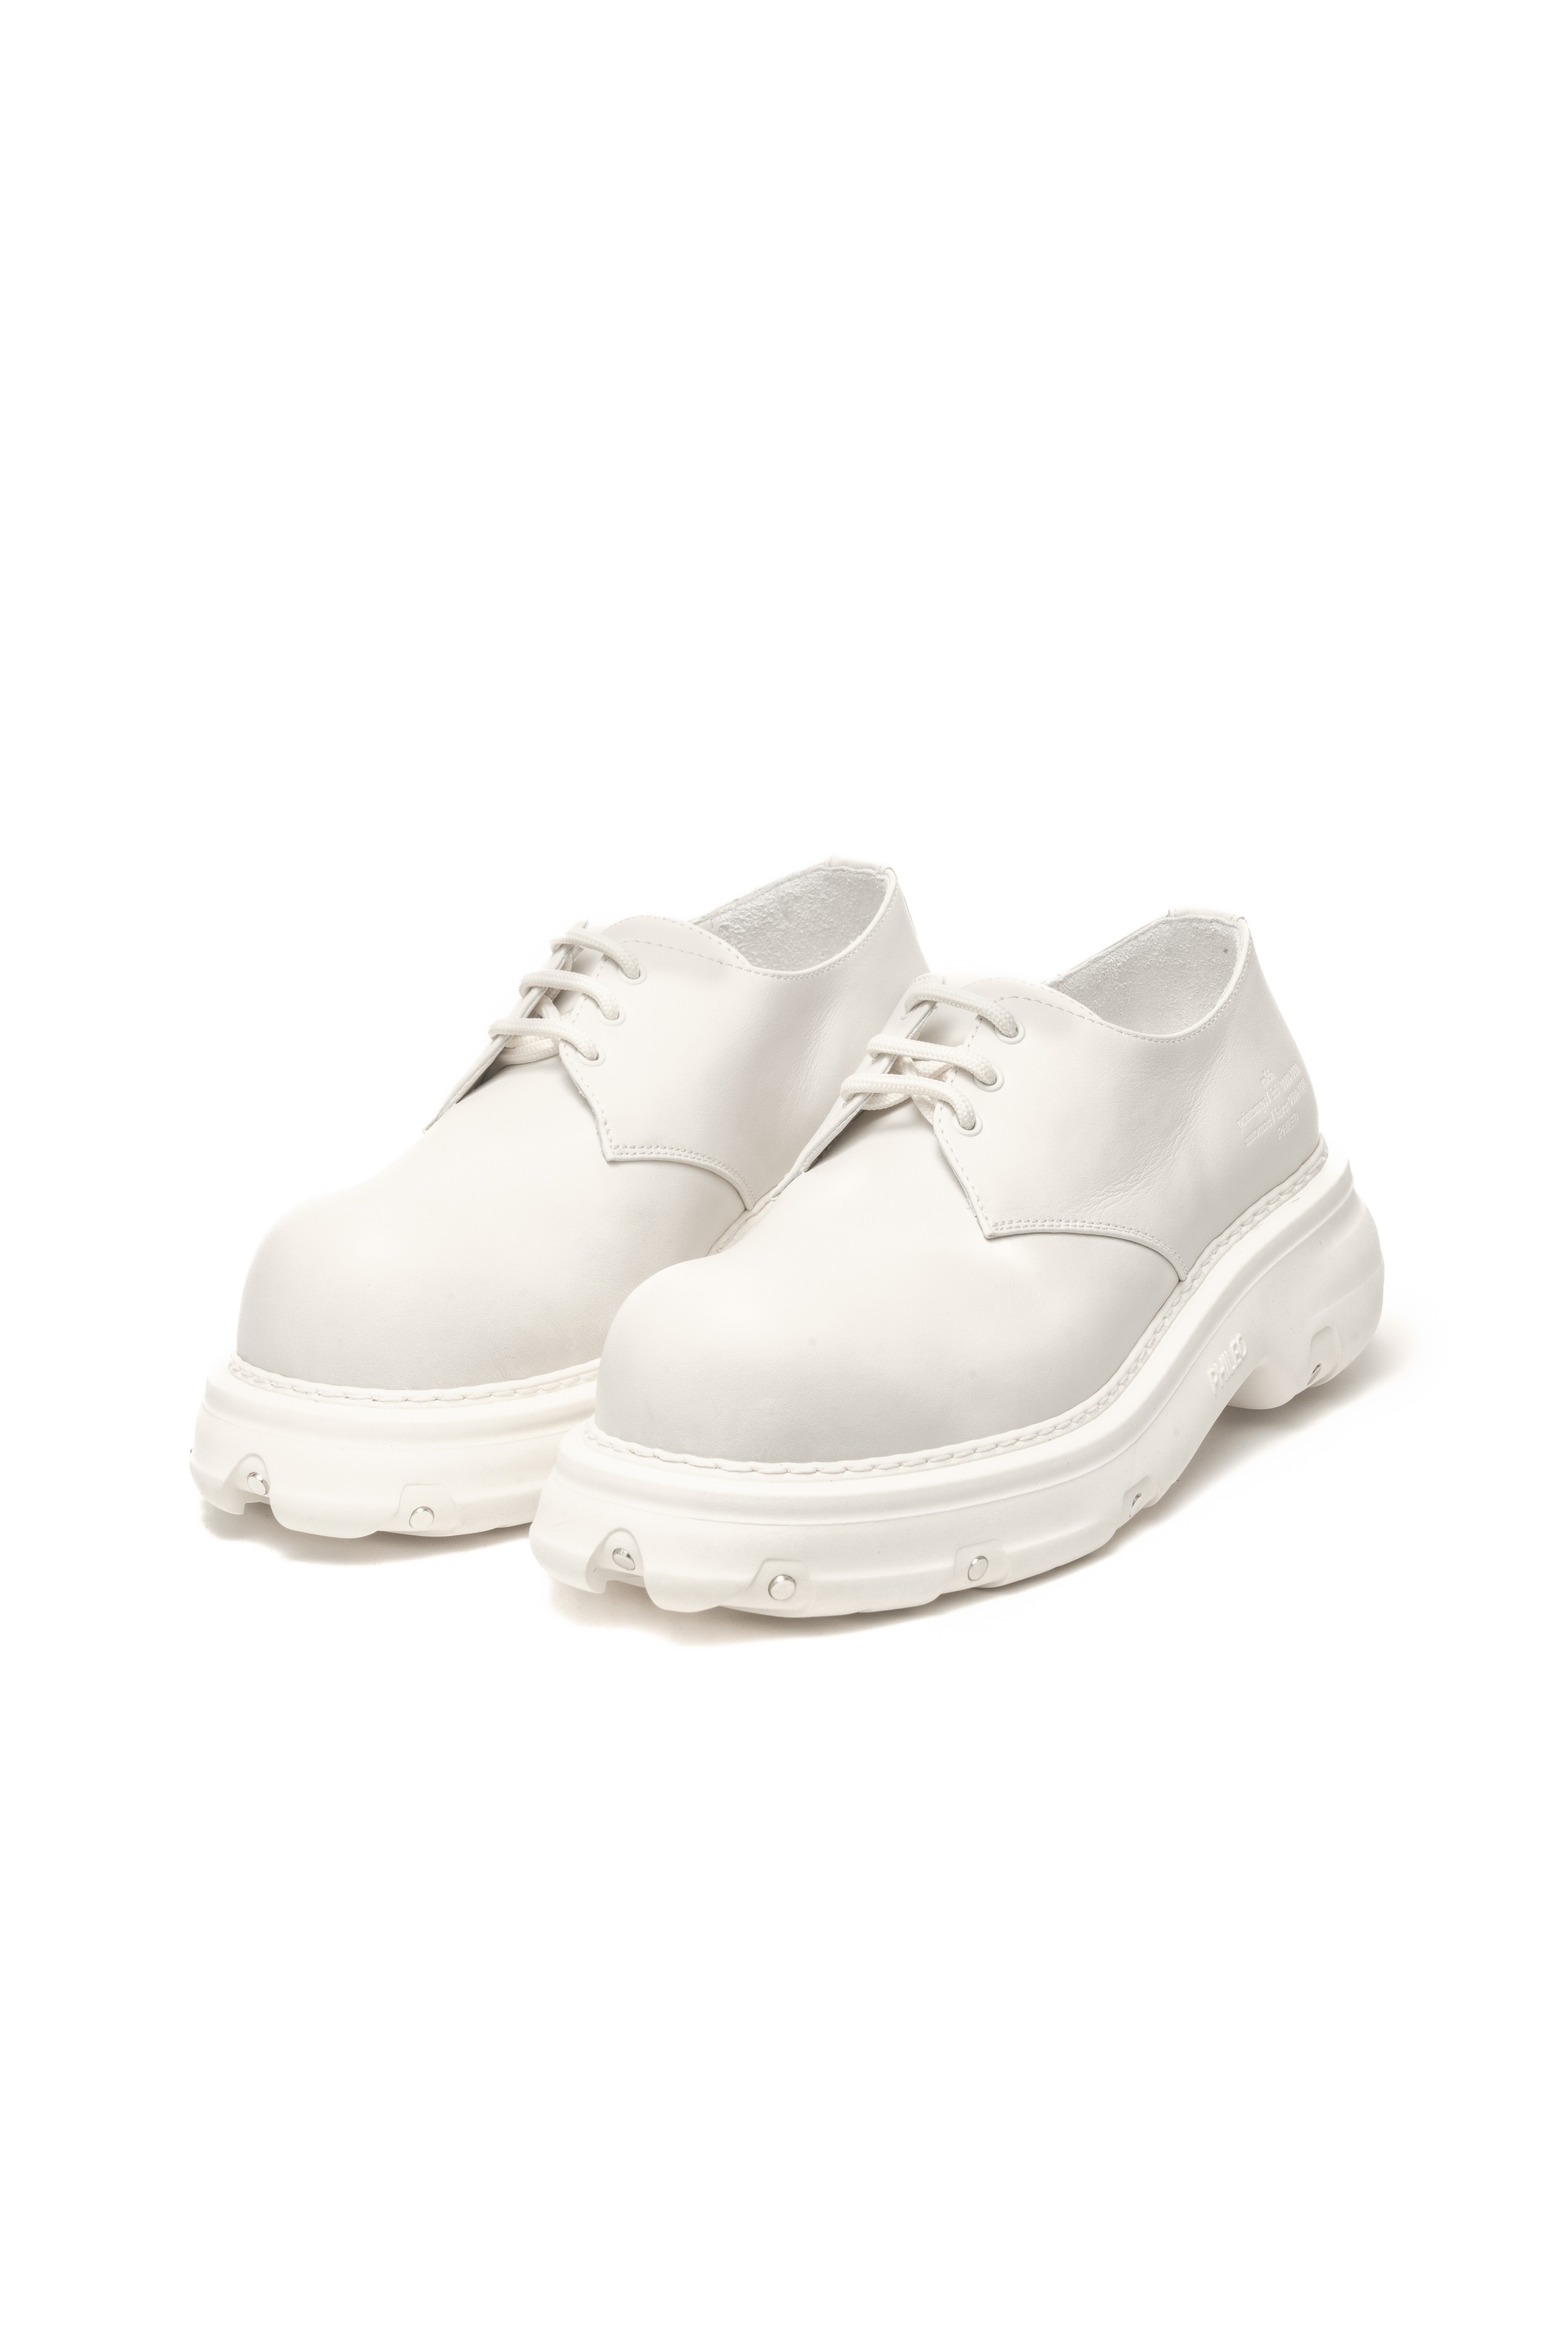 A pair of stylish white platform derby shoes on a plain background